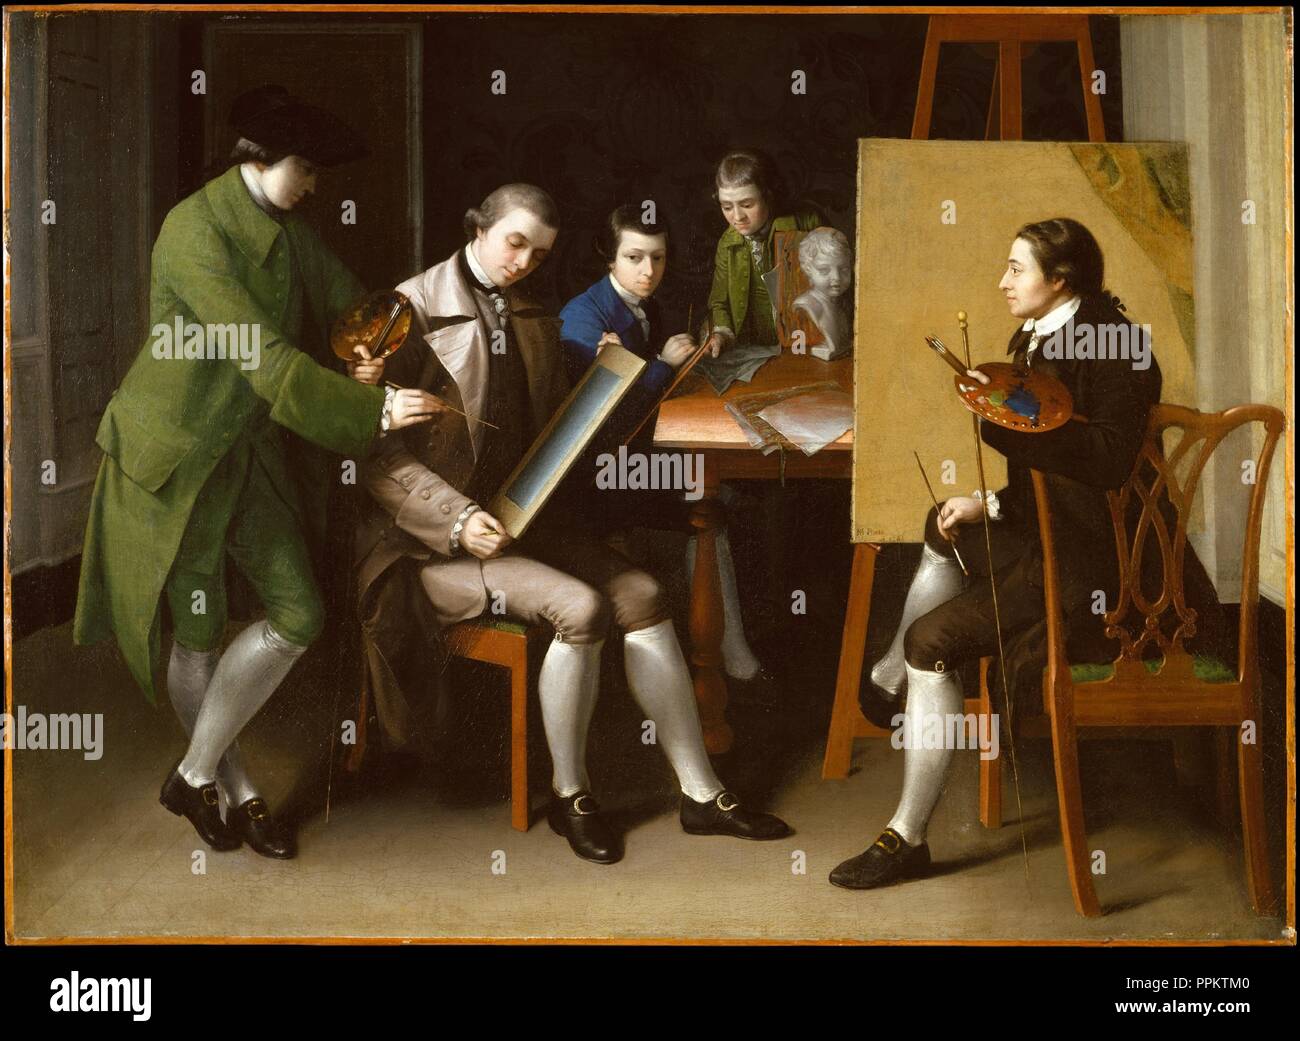 The American School. Artist: Matthew Pratt (1734-1805). Dimensions: 36 x 50 1/4 in. (91.4 x 127.6 cm). Date: 1765.  The picture depicts a scene in the London studio of Benjamin West, who is generally agreed to be the figure standing at the left. Based on comparisons to self-portraits, Pratt is the man at the easel, an accomplished portrait painter.  The identities of the other artists represented in the picture remain uncertain, but they are younger and they draw rather than paint.  The composition explores the academic tradition as carried out among Americans in late-eighteenth century London Stock Photo